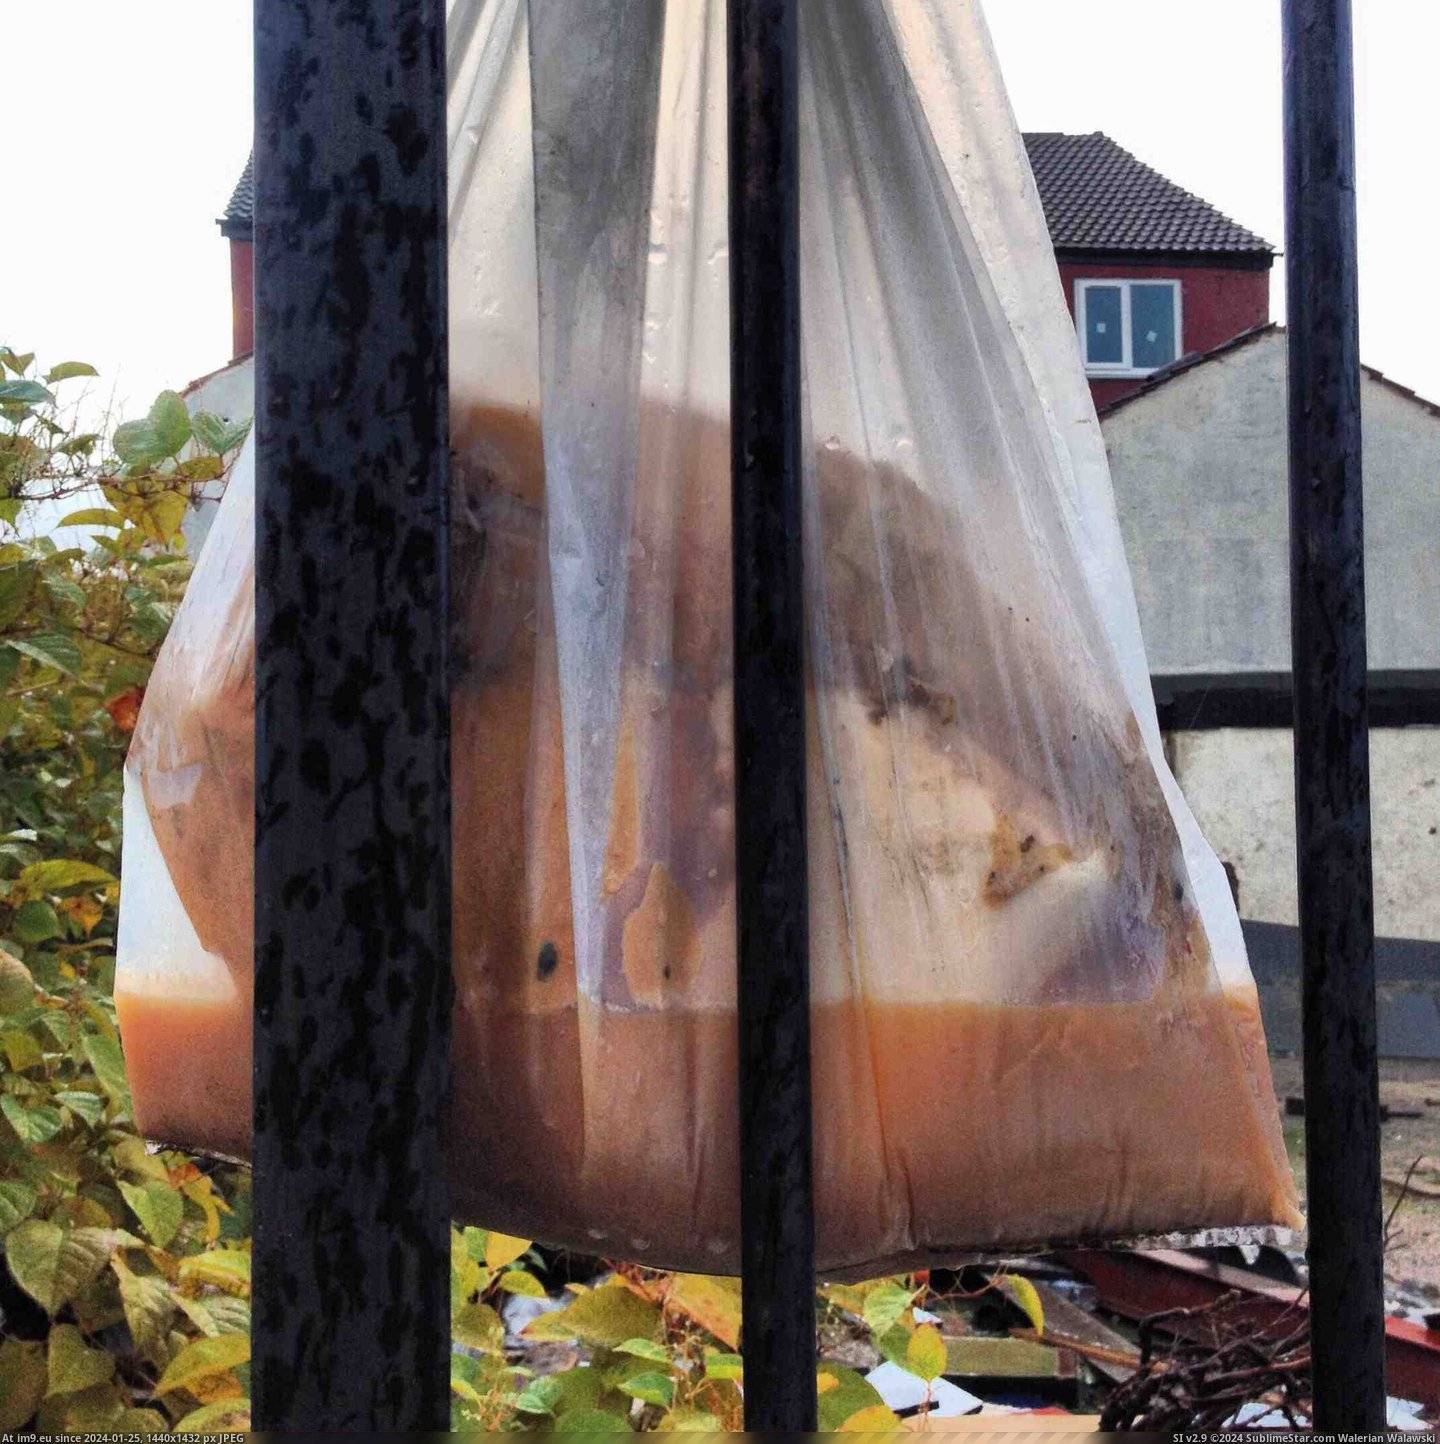 #Wtf #Saw #Railings #Hanging #Bag [Wtf] Saw this bag of WTF hanging on some railings Pic. (Изображение из альбом My r/WTF favs))